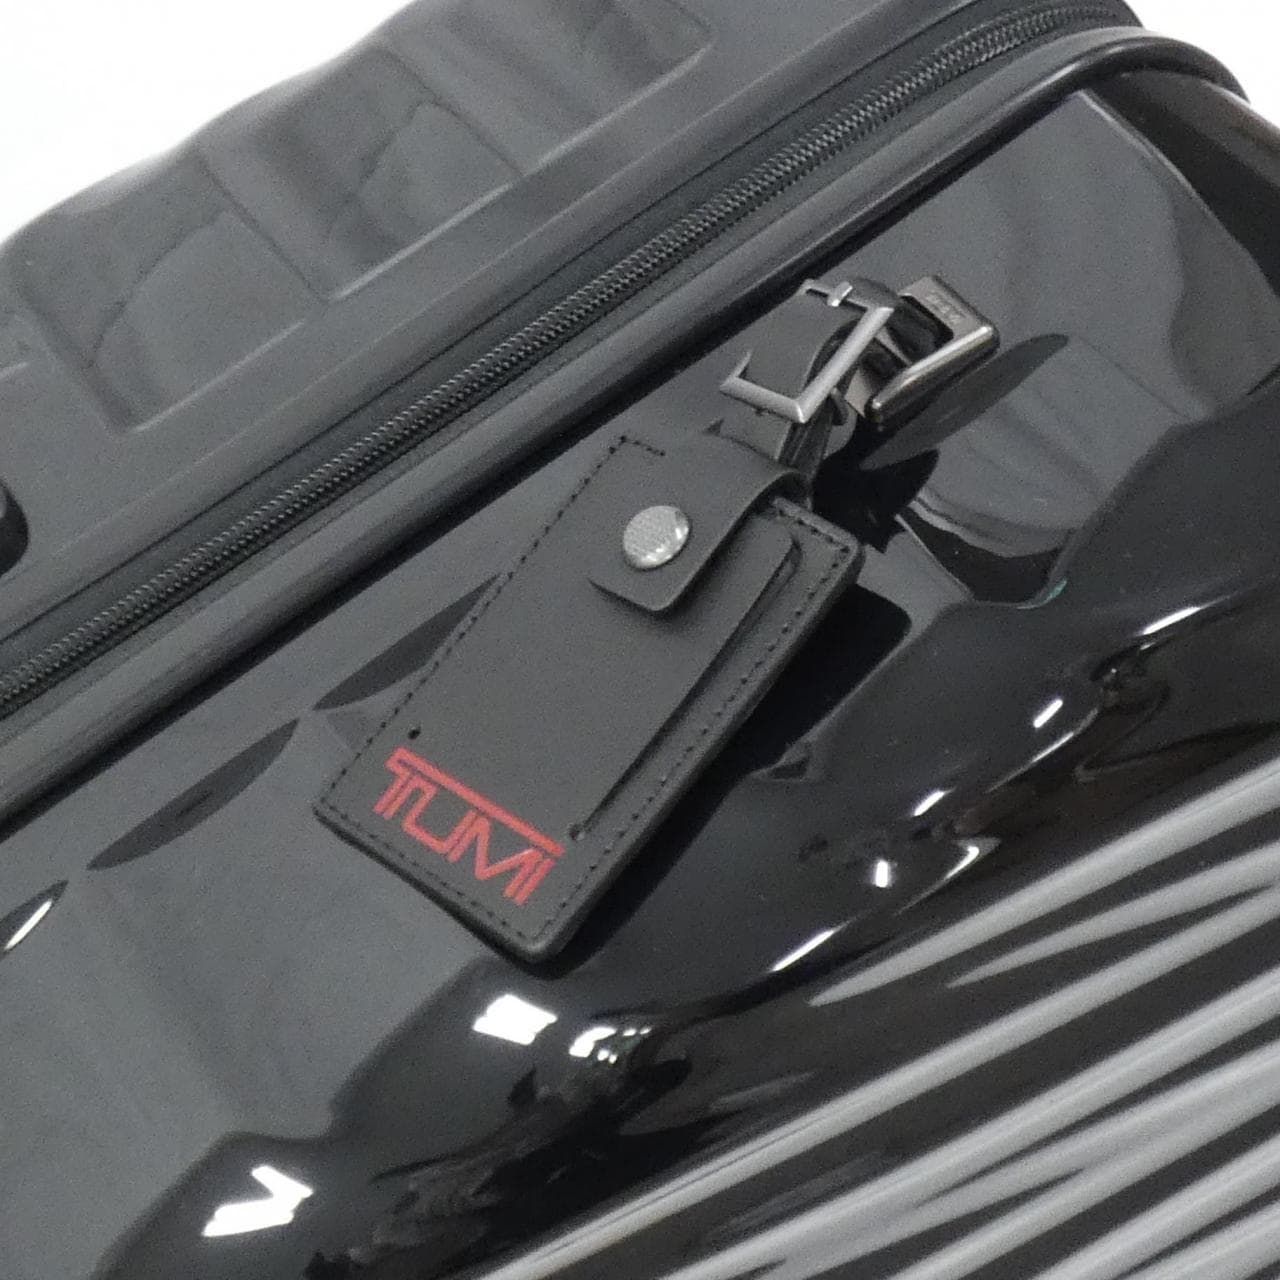 [BRAND NEW] TUMI 19 DEGREE Extended Trip Expandable 4 Wheel Packing 99L 1396861041 Carry Bag